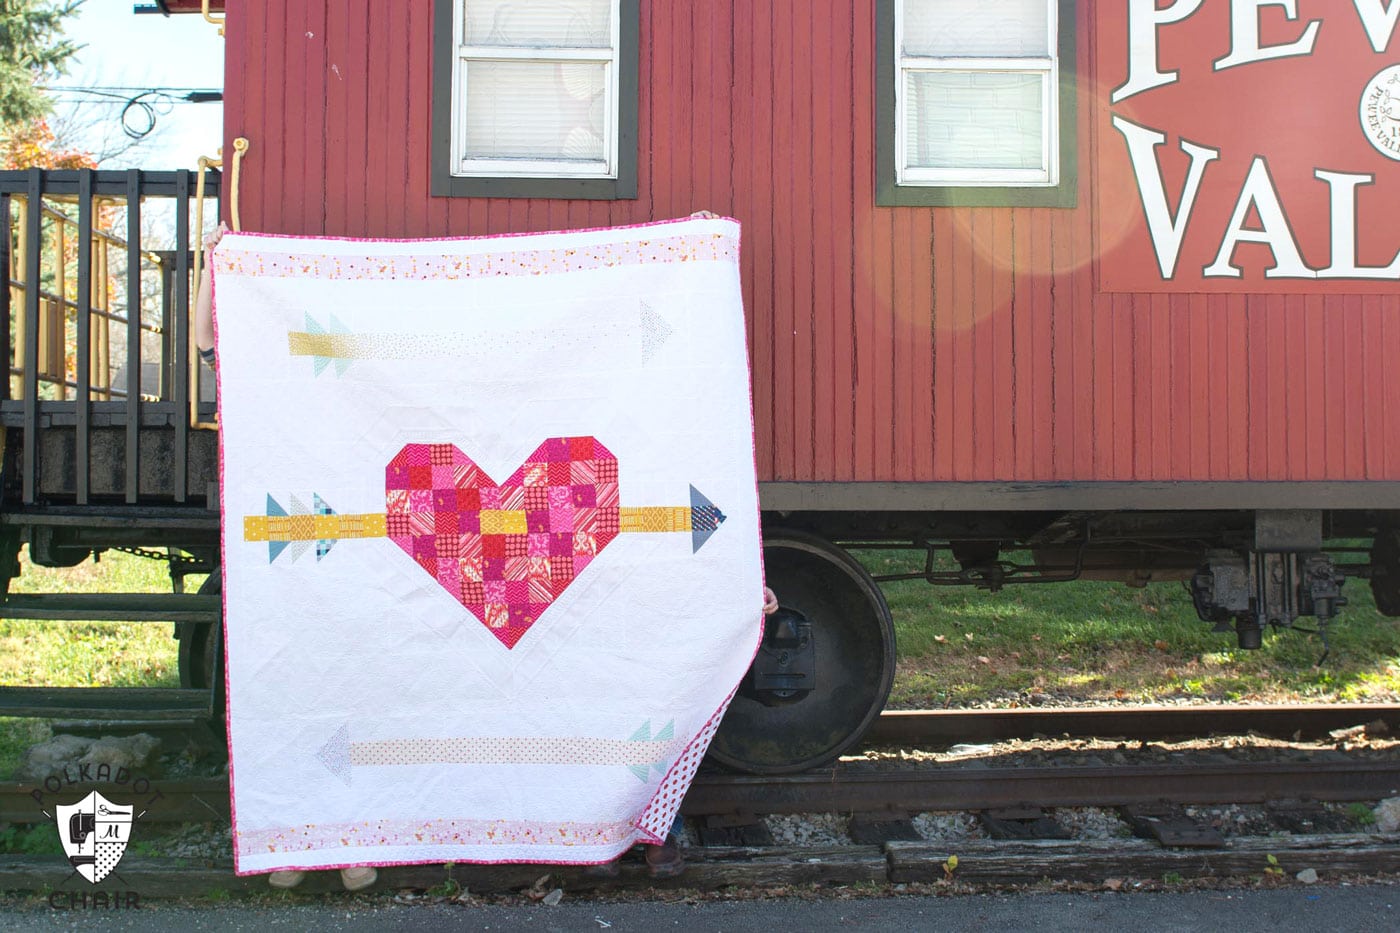 Cupid's Arrow Quilt Pattern, a fun twist on a patchwork heart quilt